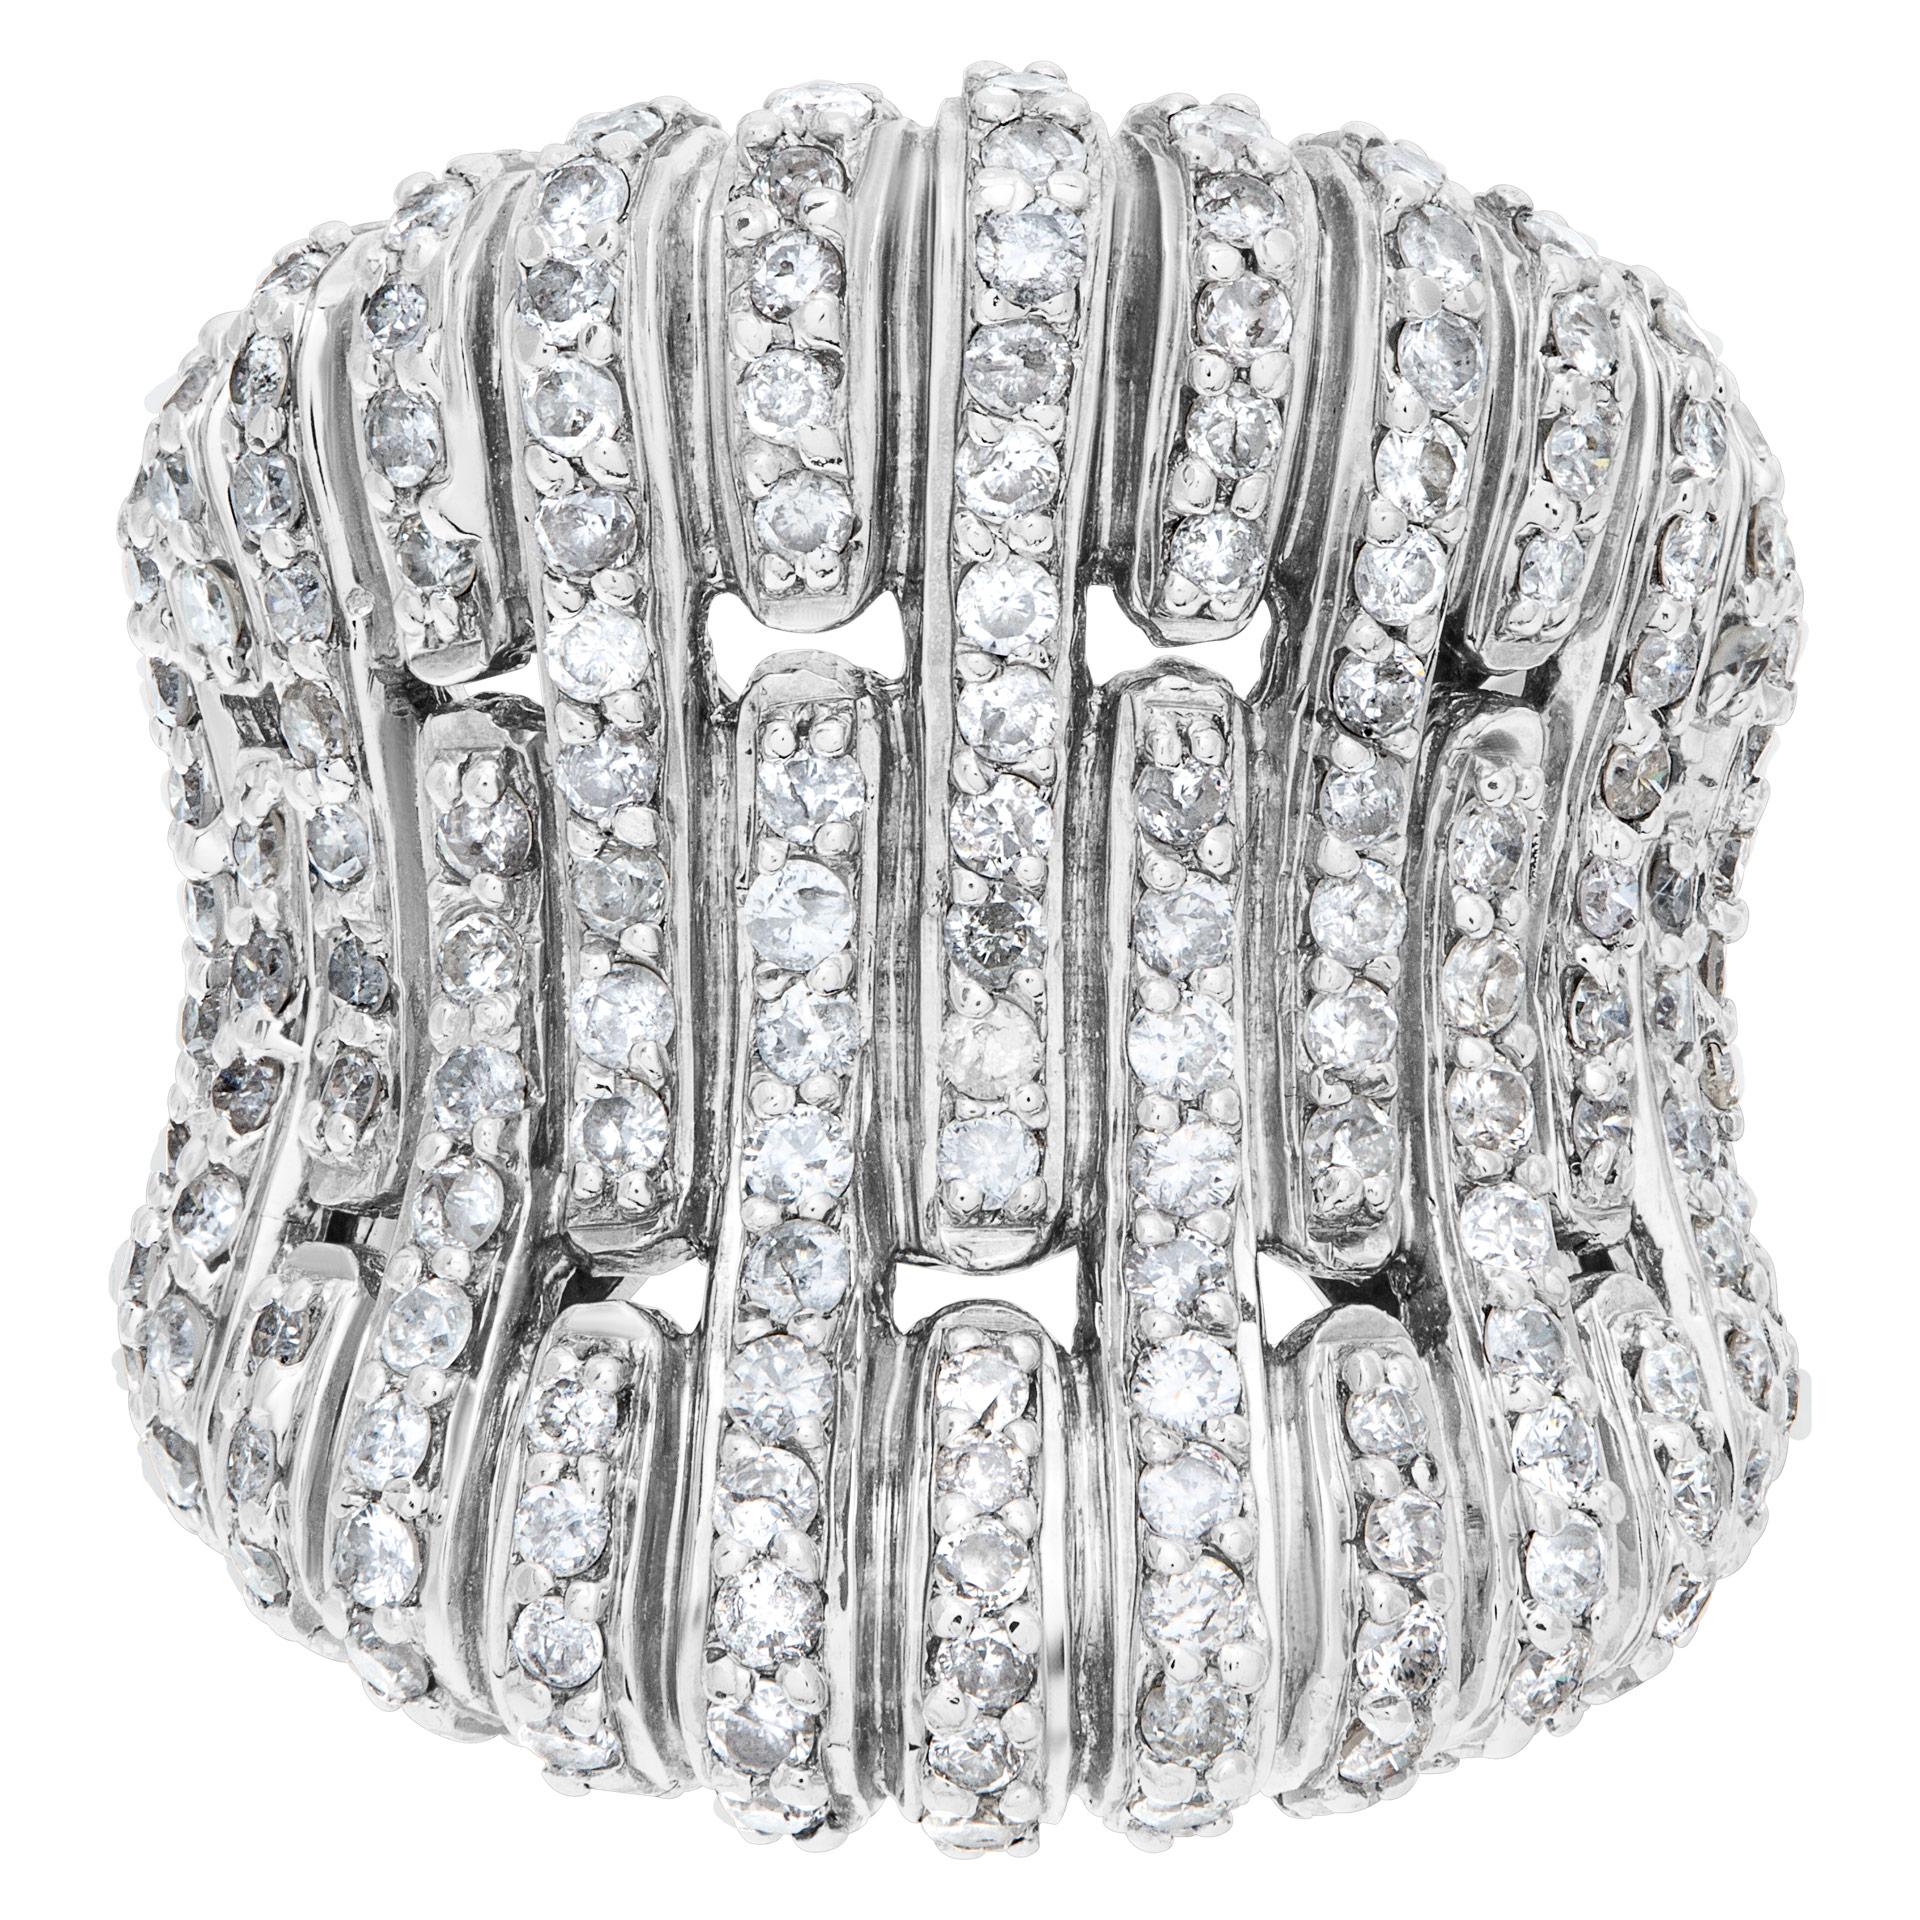 Ring with unique fan design in 18k white gold with over 1.0 carat in micro pave set diamonds. Ring is approximately 24mm wide at the front. Size 6.75  This Diamond ring is currently size 6.75 and some items can be sized up or down, please ask! It